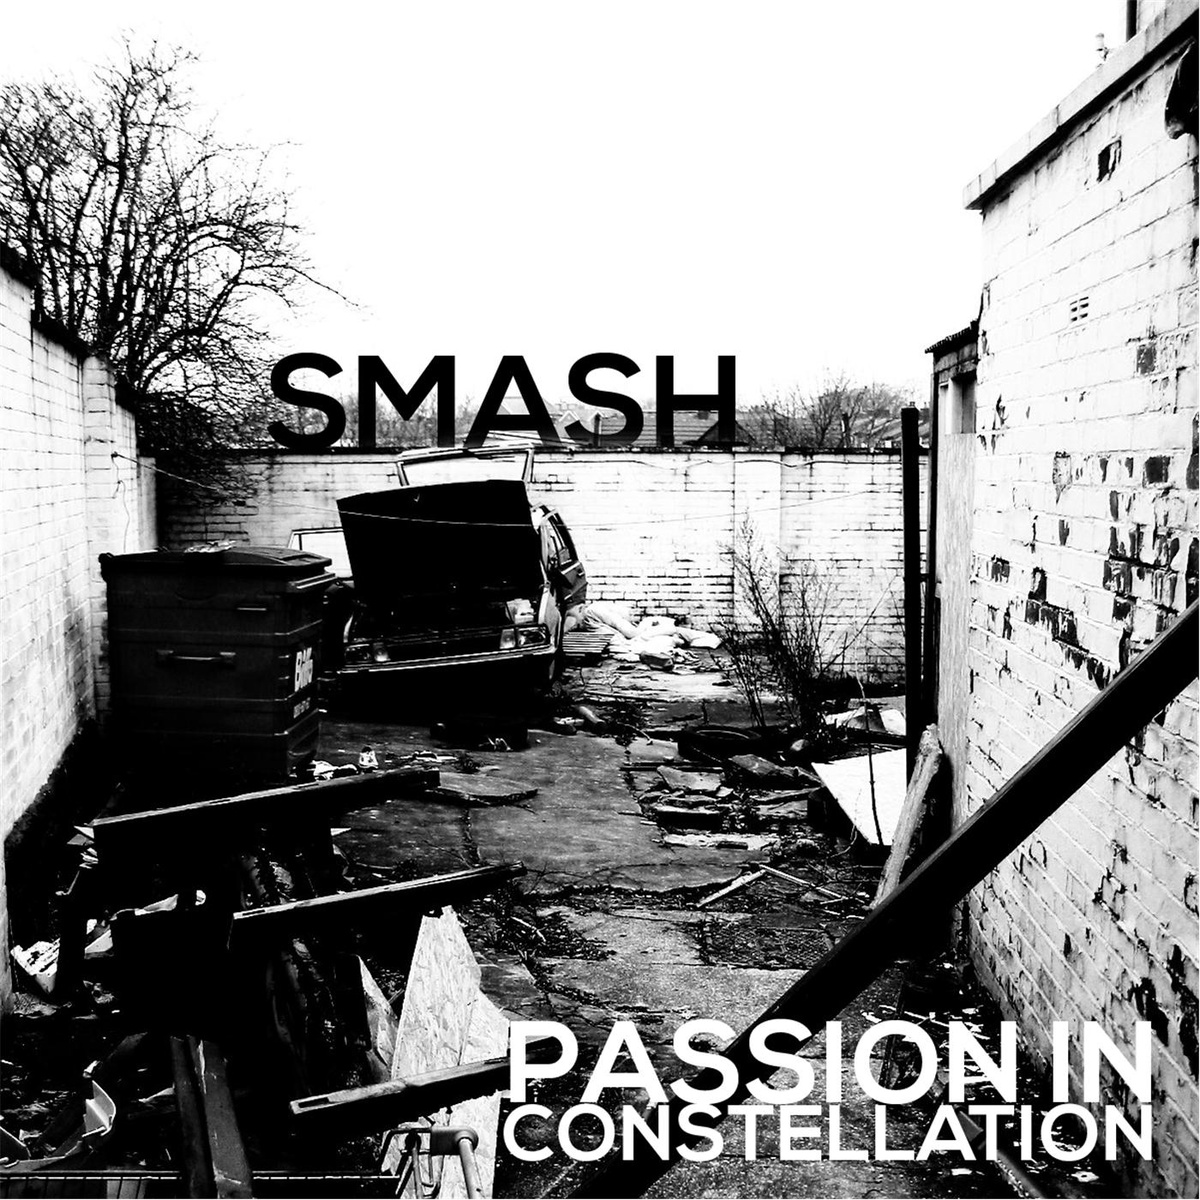 Passion in Constellation Releases Latest Single, “Smash”